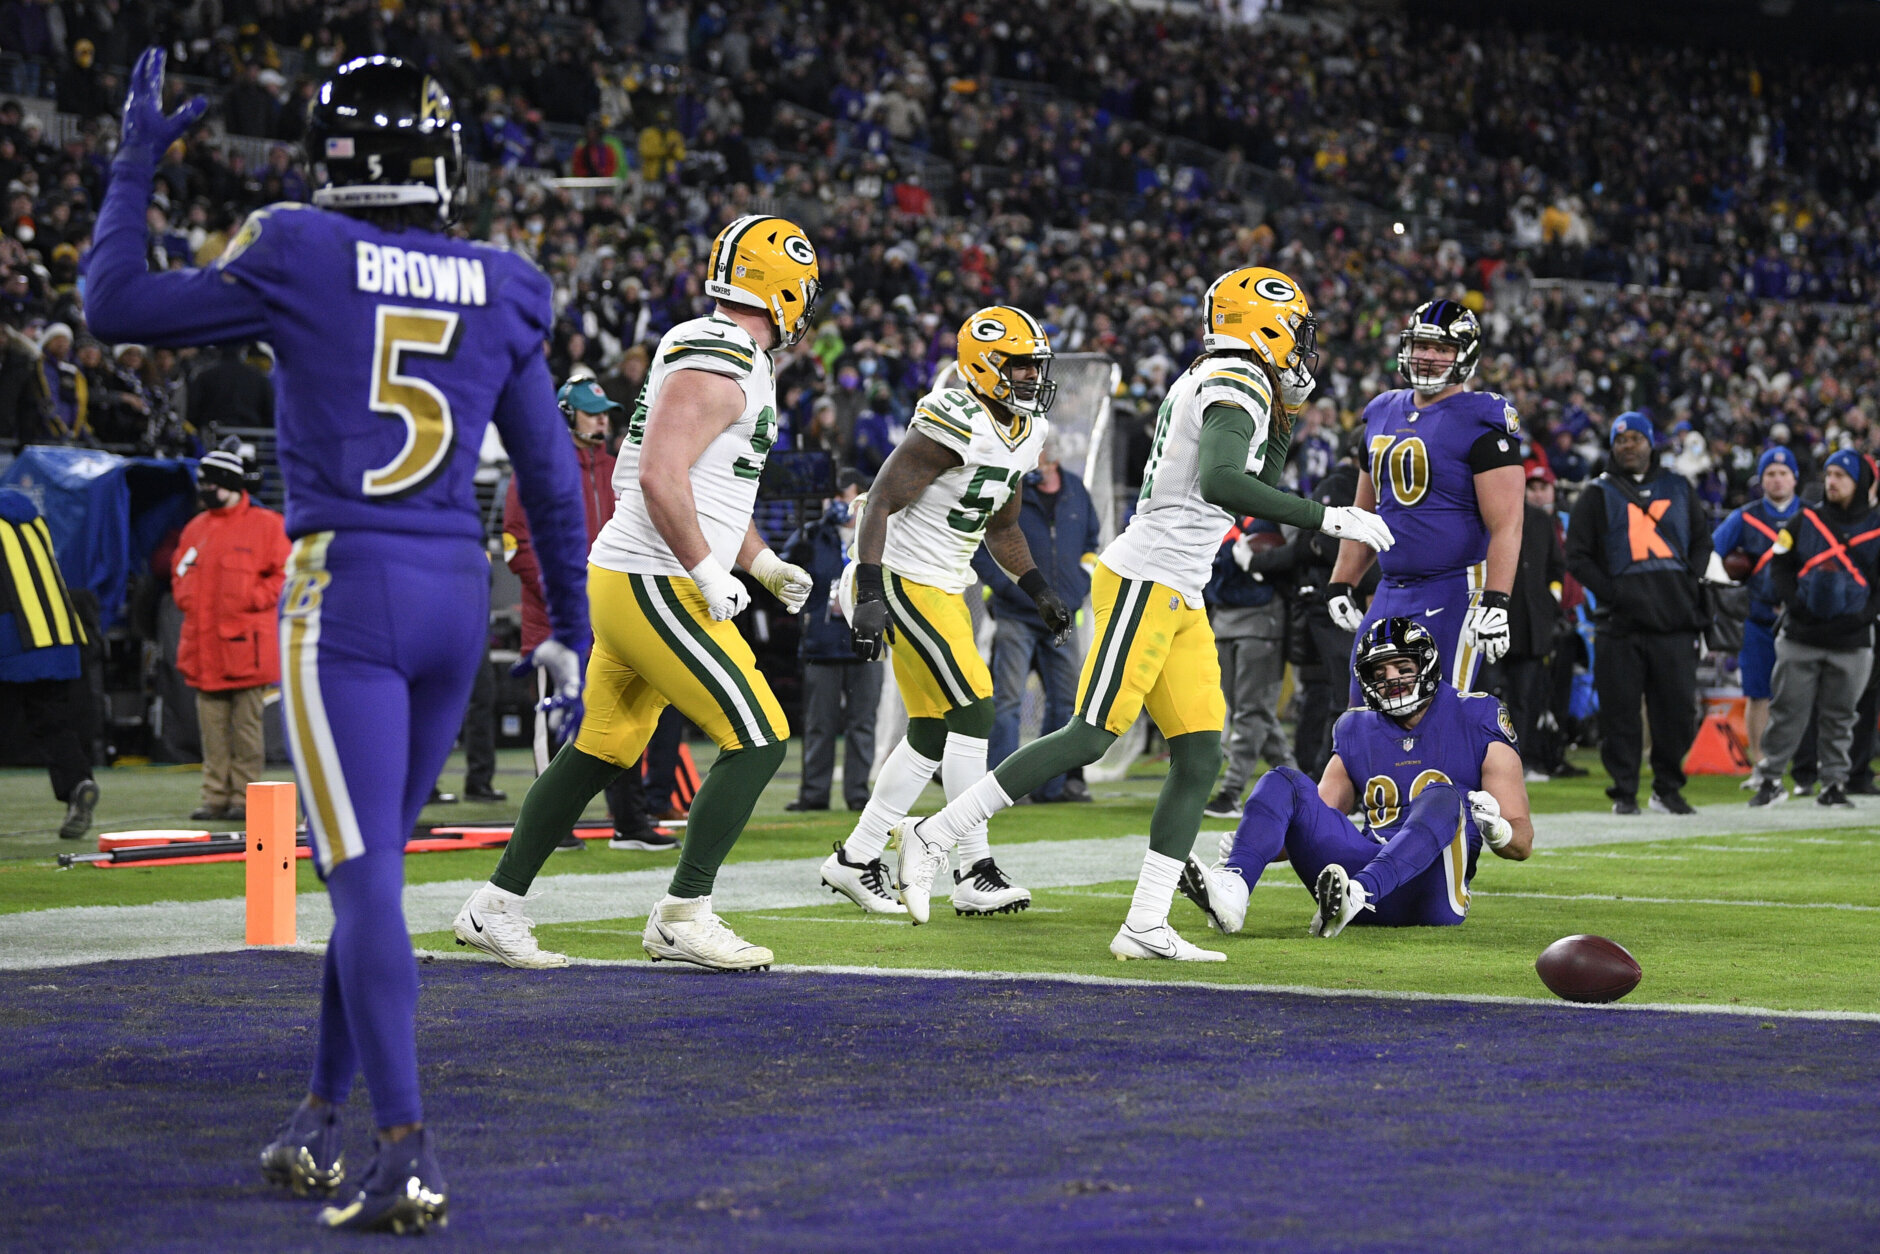 <p><em><strong>Packers 31</strong></em><br />
<em><strong>Ravens 30</strong></em></p>
<p>When Baltimore sifts through the wreckage of this season, going 2-for-8 on two-point conversions will be No. 2 on the list of reasons the Ravens are home for the holidays (second behind injuries, of course). <a href="https://profootballtalk.nbcsports.com/2021/12/19/tyler-huntley-had-two-pass-tds-two-rush-tds-which-lamar-jackson-has-never-done/" target="_blank" rel="noopener">Tyler Huntley played better than Lamar Jackson in some ways</a> and a loss in Cincinnati will all but end football season in Charm City.</p>
<p>Meanwhile, Aaron Rodgers pulled even with predecessor (and sorta nemesis) Brett Favre for the Packers&#8217; franchise record of 442 career touchdown passes. I&#8217;m interested to see how the Lambeau Field crowd reacts when A-Rod inevitably passes favorite son Favre Sunday.</p>
